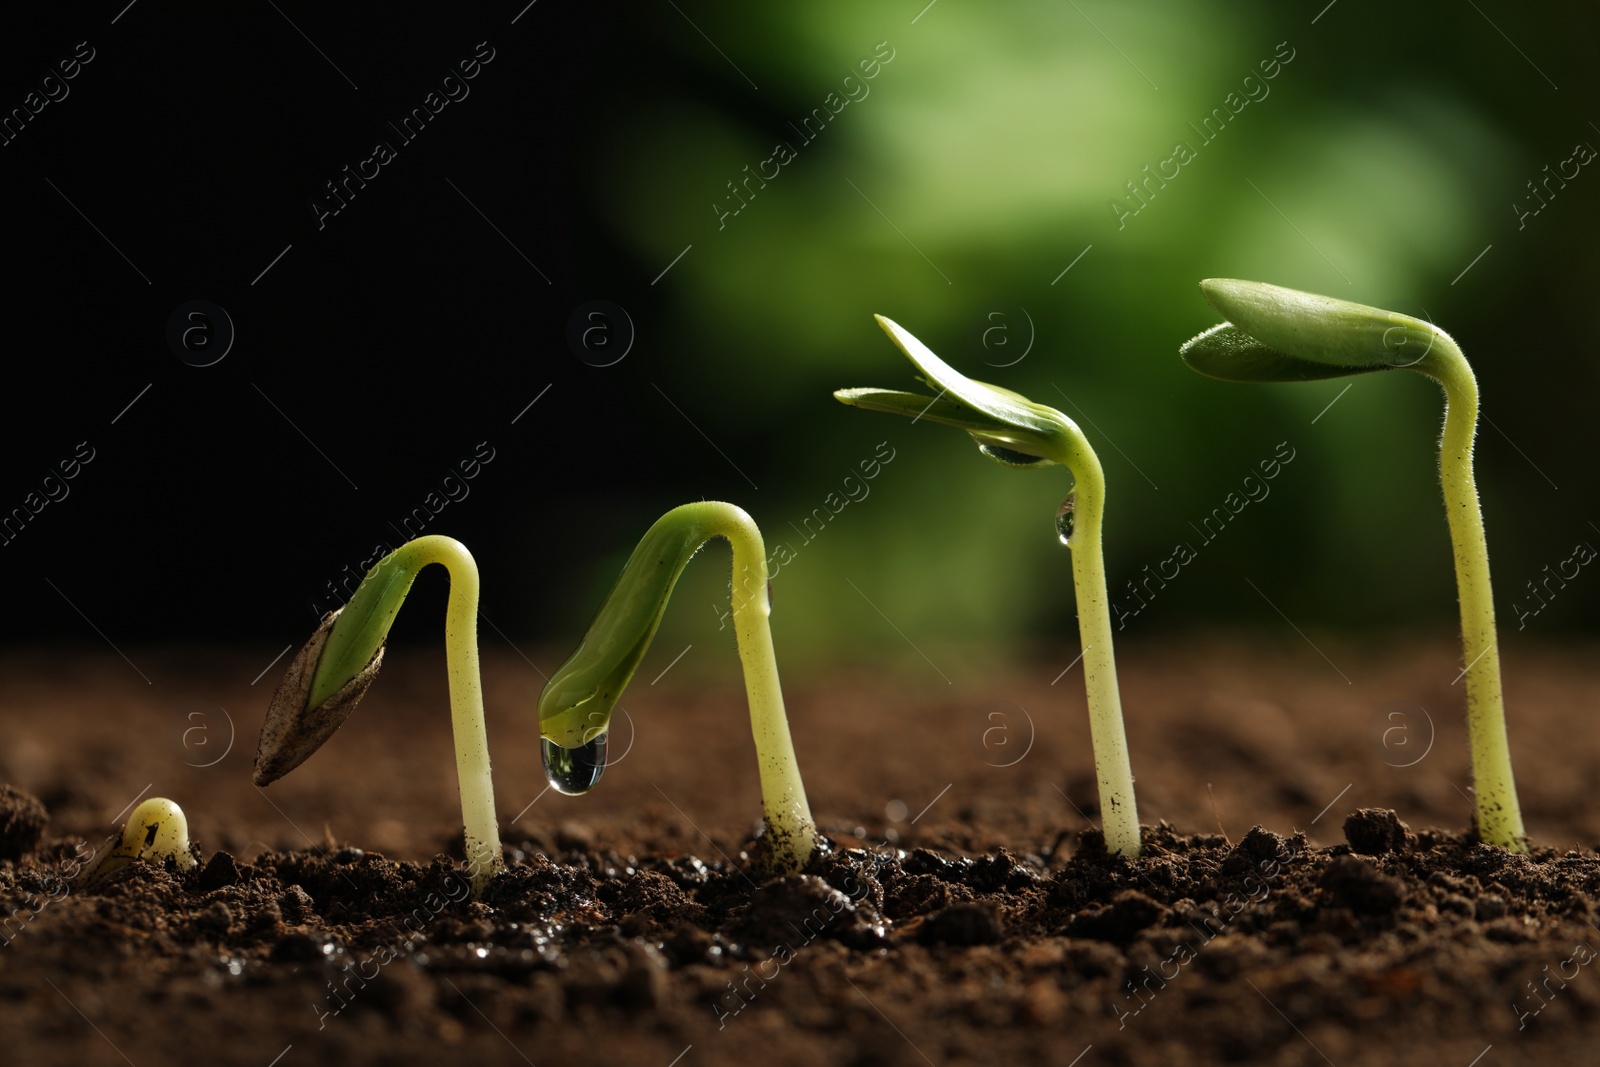 Photo of Little green seedlings growing in soil against blurred background, closeup view